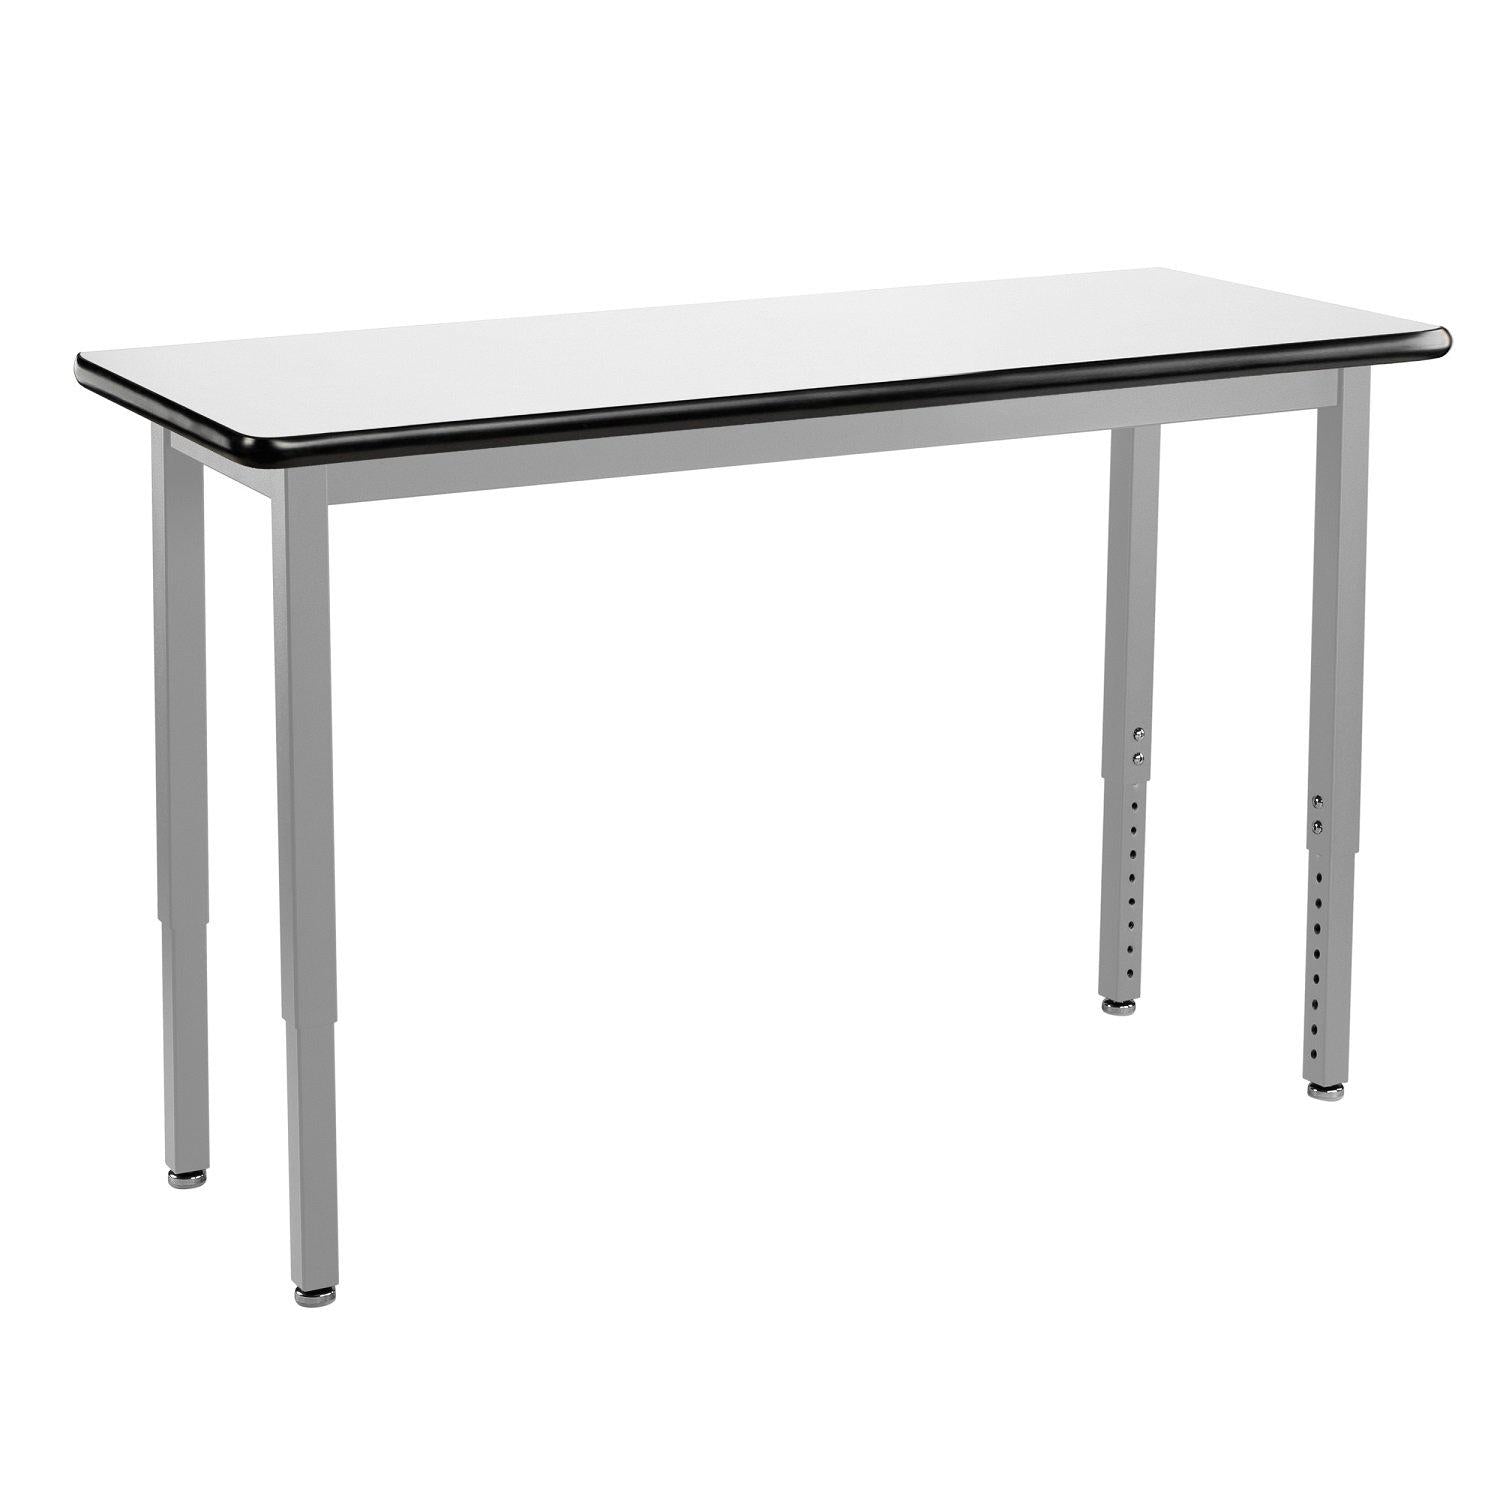 Heavy-Duty Height-Adjustable Utility Table, Soft Grey Frame, 18" x 60", Whiteboard High-Pressure Laminate Top